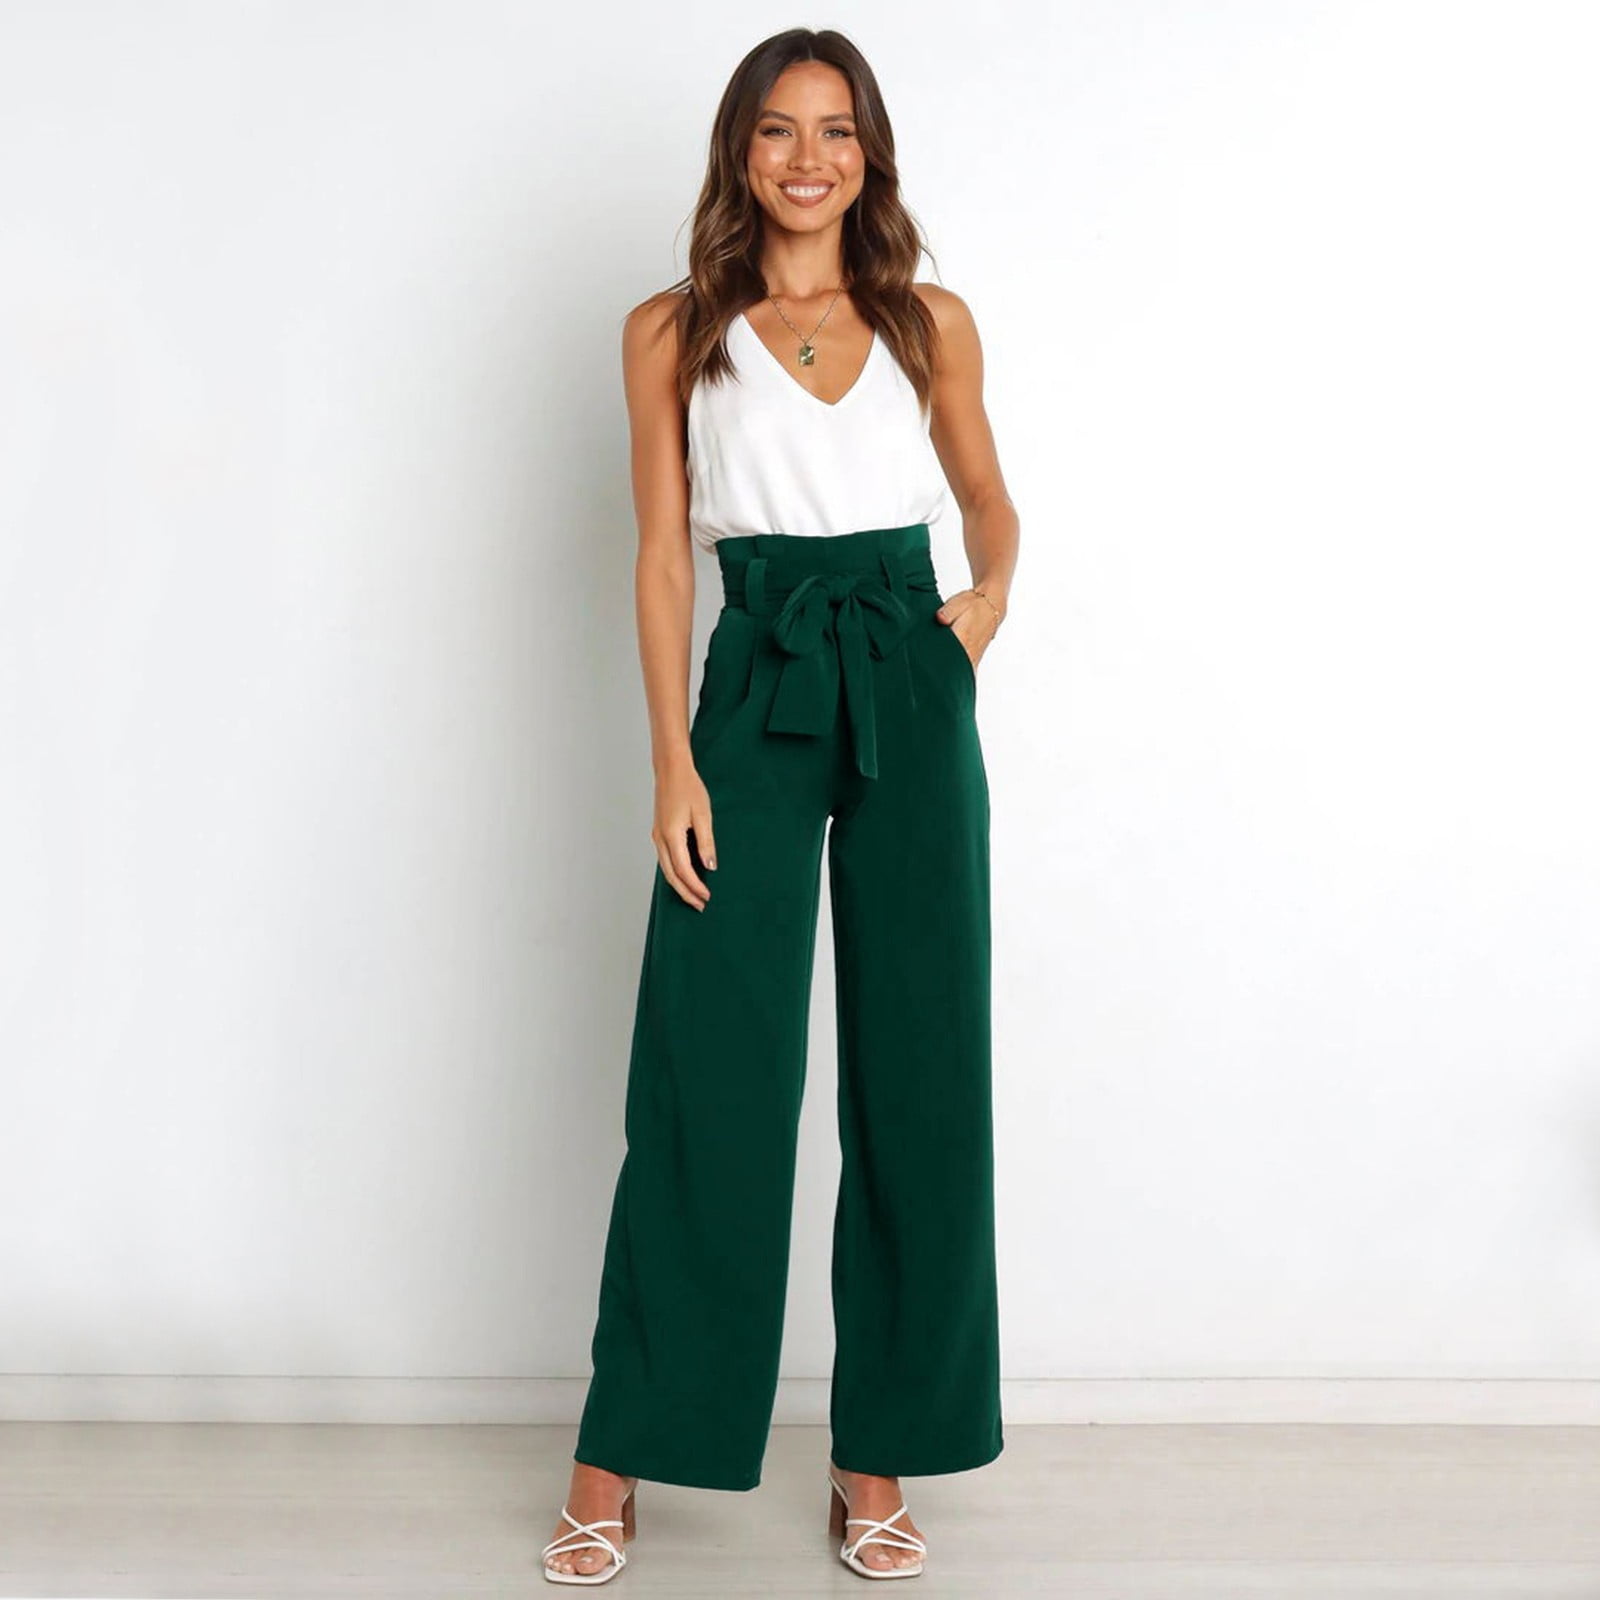 CAICJ98 Womens Pants Women's Casual High Waist Fold Pleated Straight Leg  Trousers Work Pants with Pocket Army Green,XL 